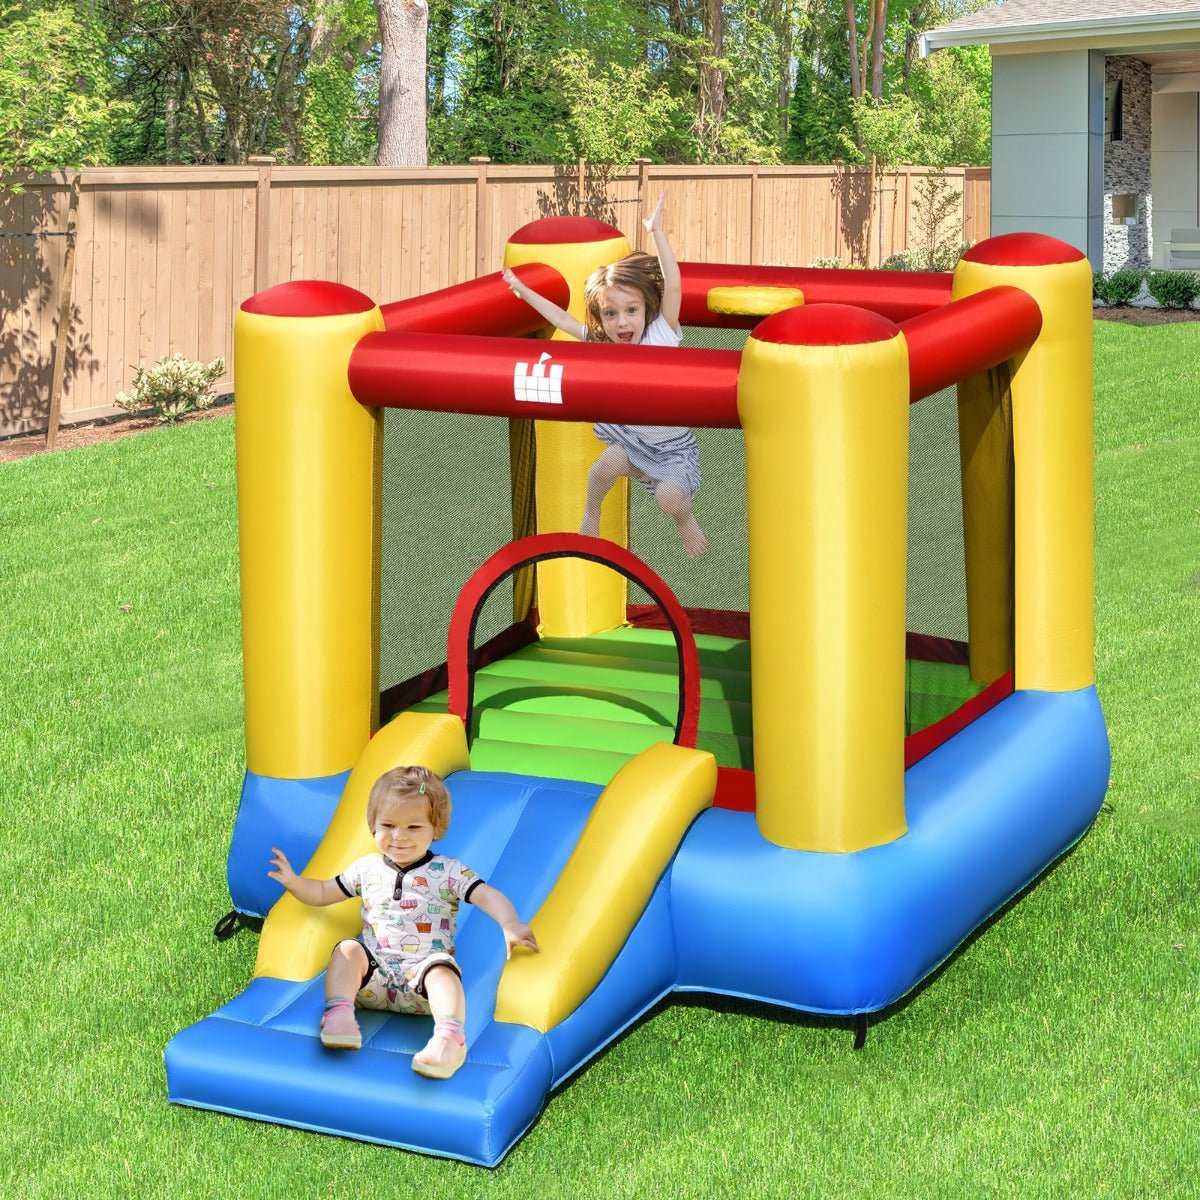 Wholesome Fun: Kid-Friendly Inflatable Bounce House with Slide